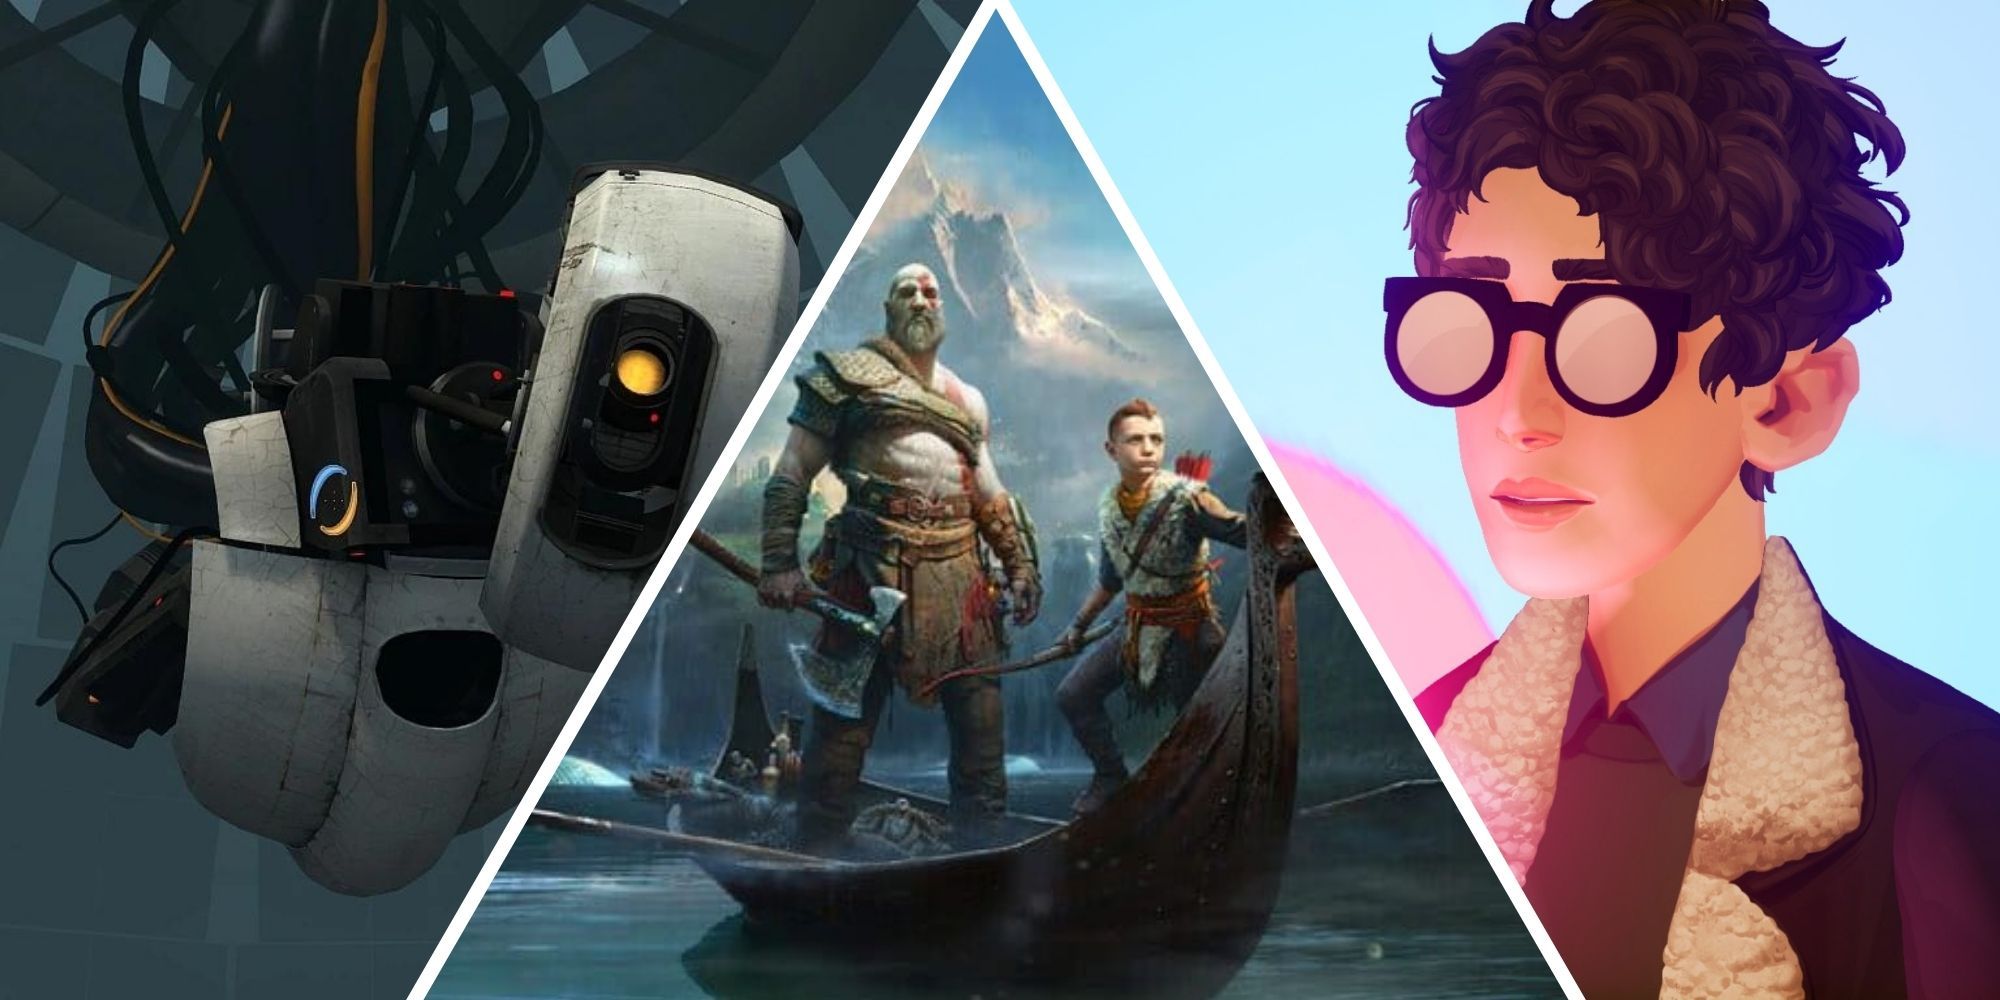 Glados from Portal, Kratos and Atreus from God of War, Francis from The Artful Escape